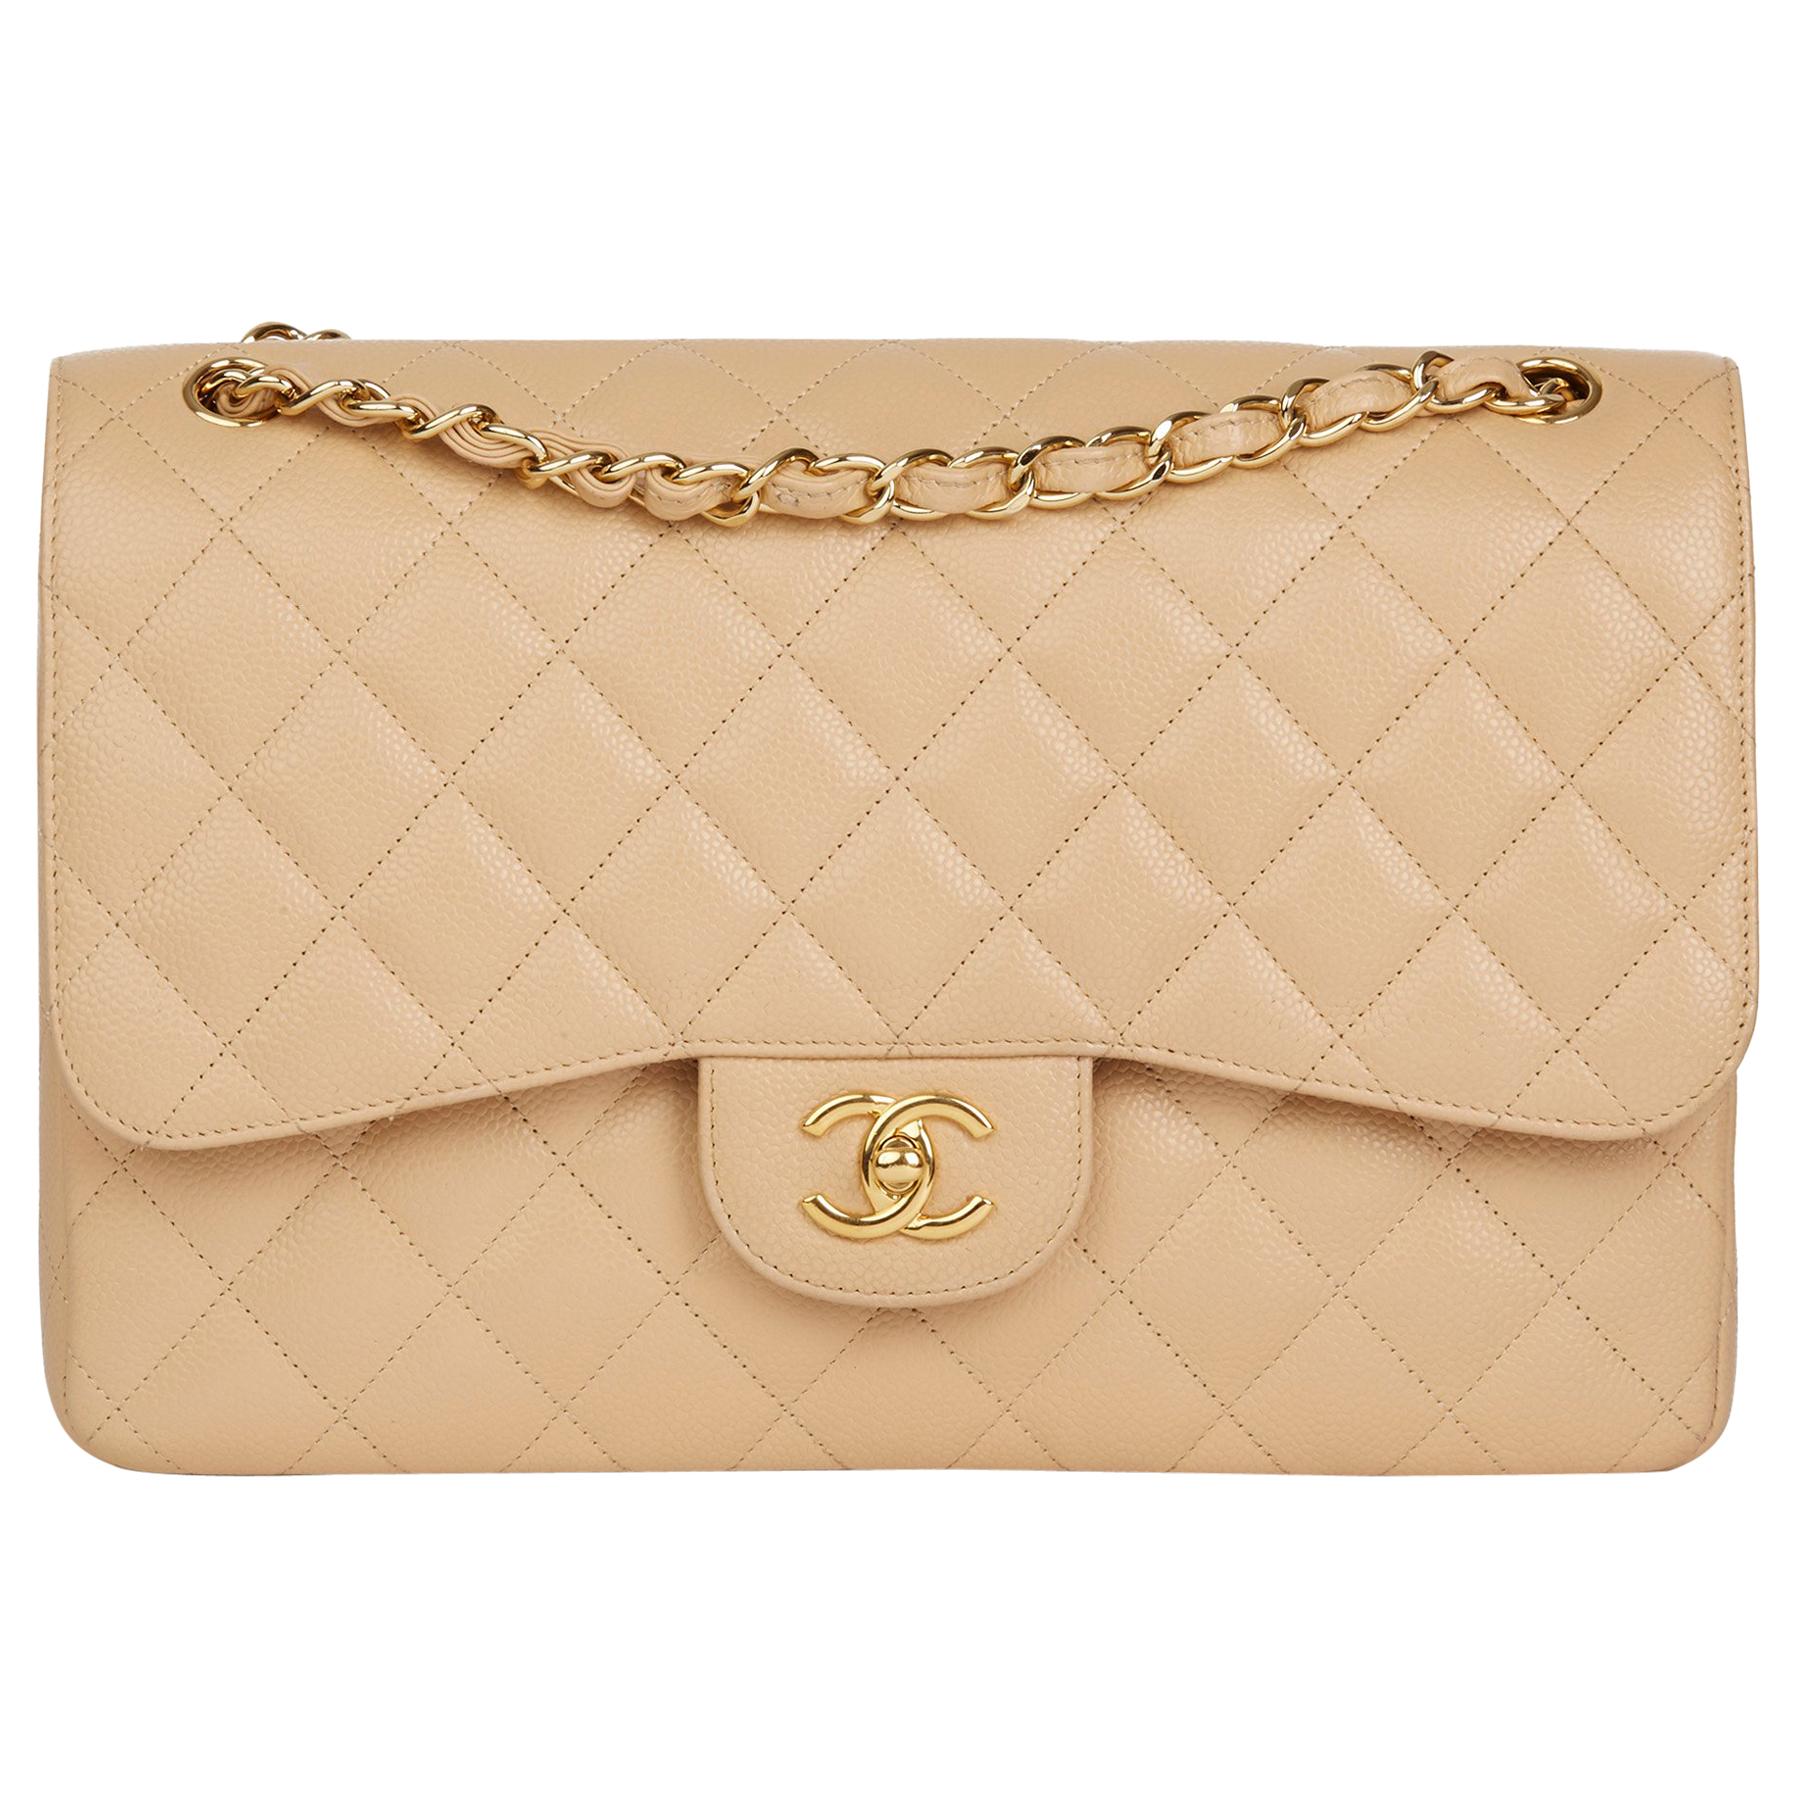 2013 Chanel Beige Quilted Caviar Leather Jumbo Classic Double Flap Bag